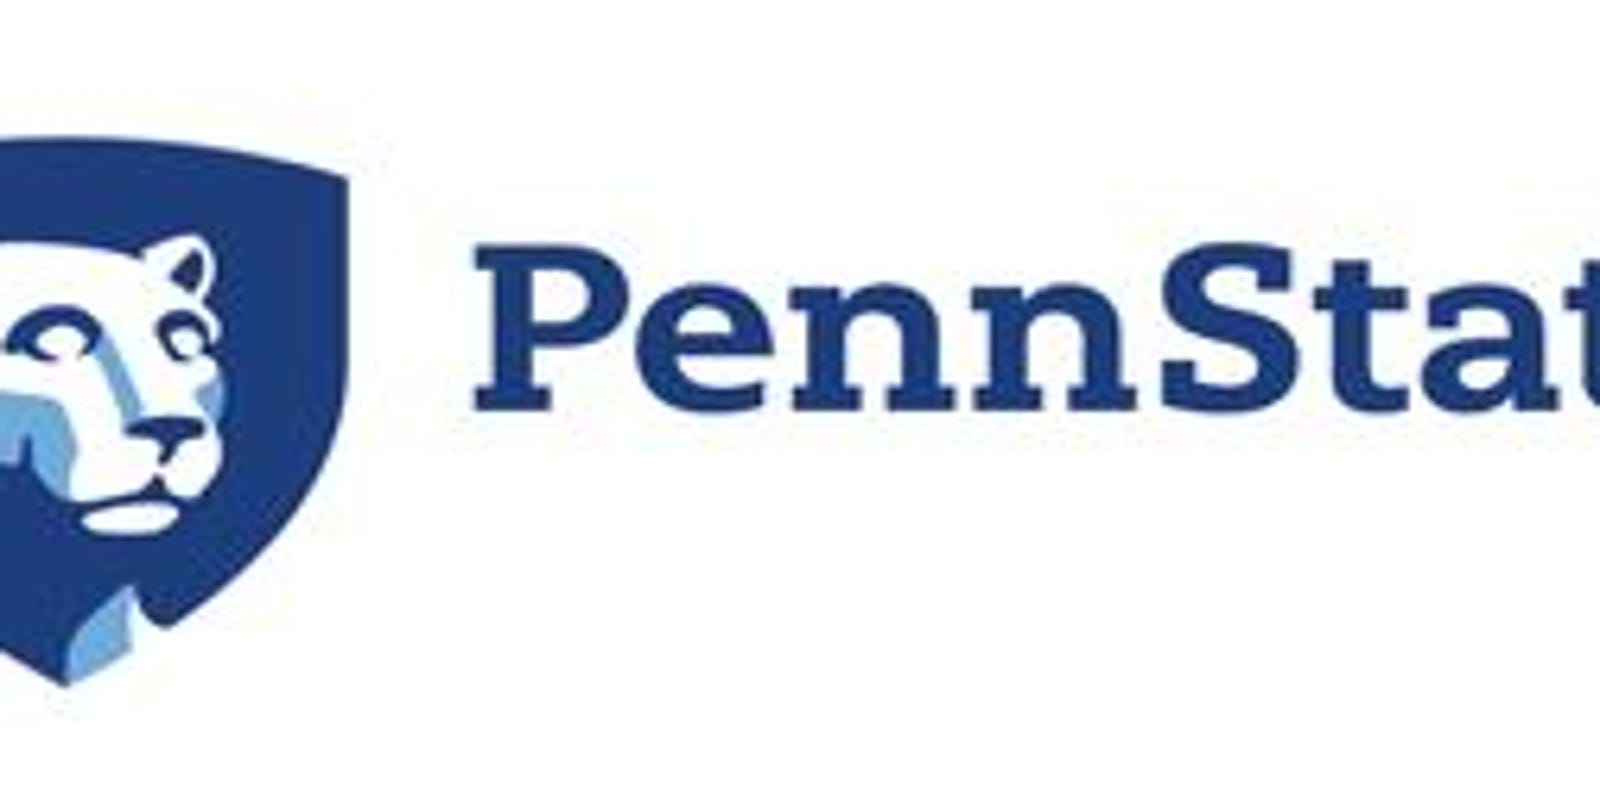 Poll Which Penn State Logo Do You Like Better